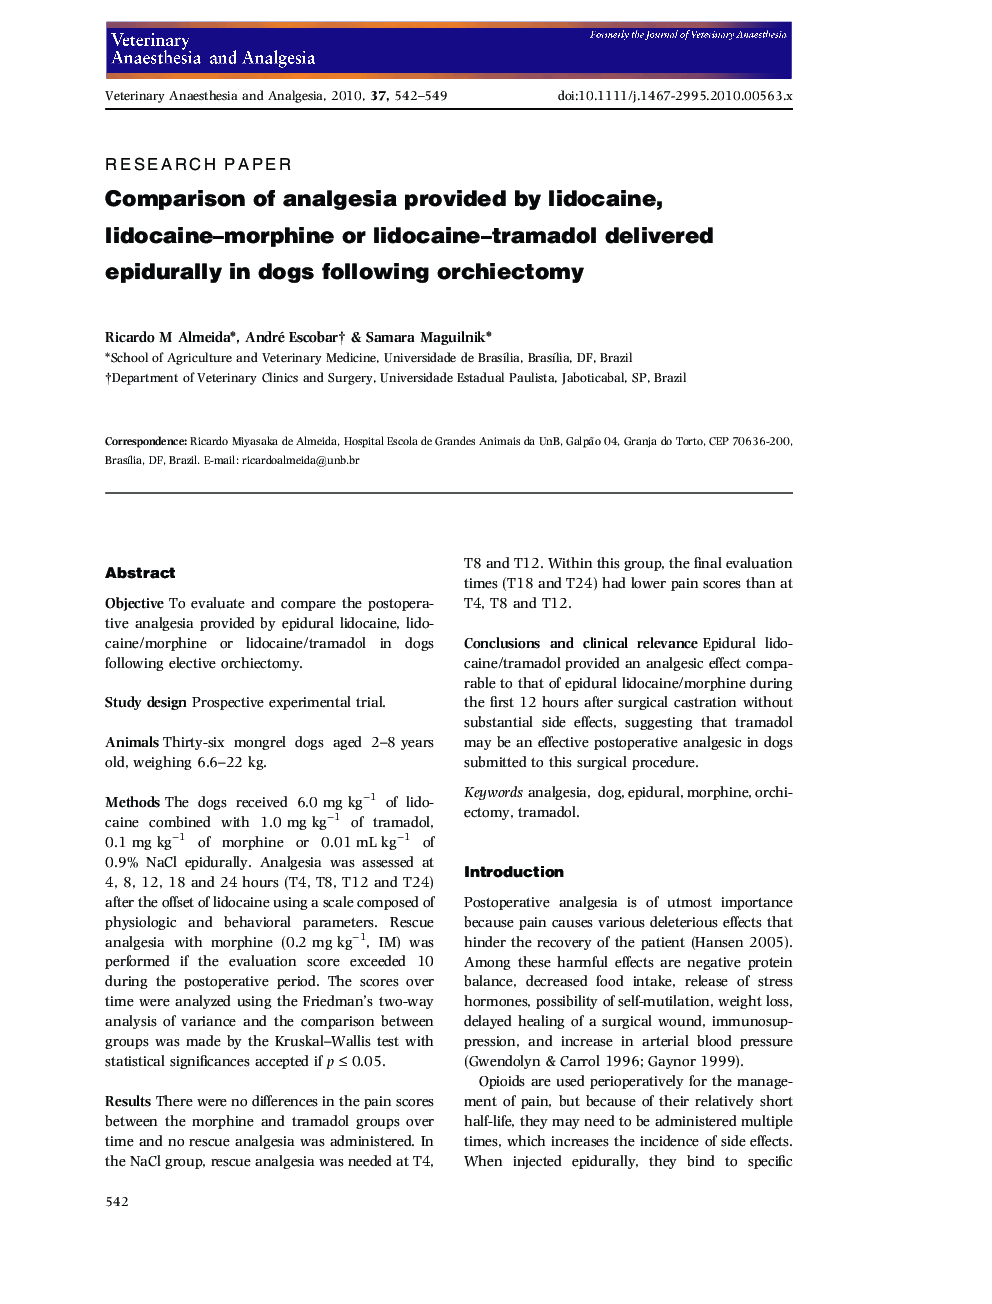 Comparison of analgesia provided by lidocaine, lidocaine-morphine or lidocaine-tramadol delivered epidurally in dogs following orchiectomy